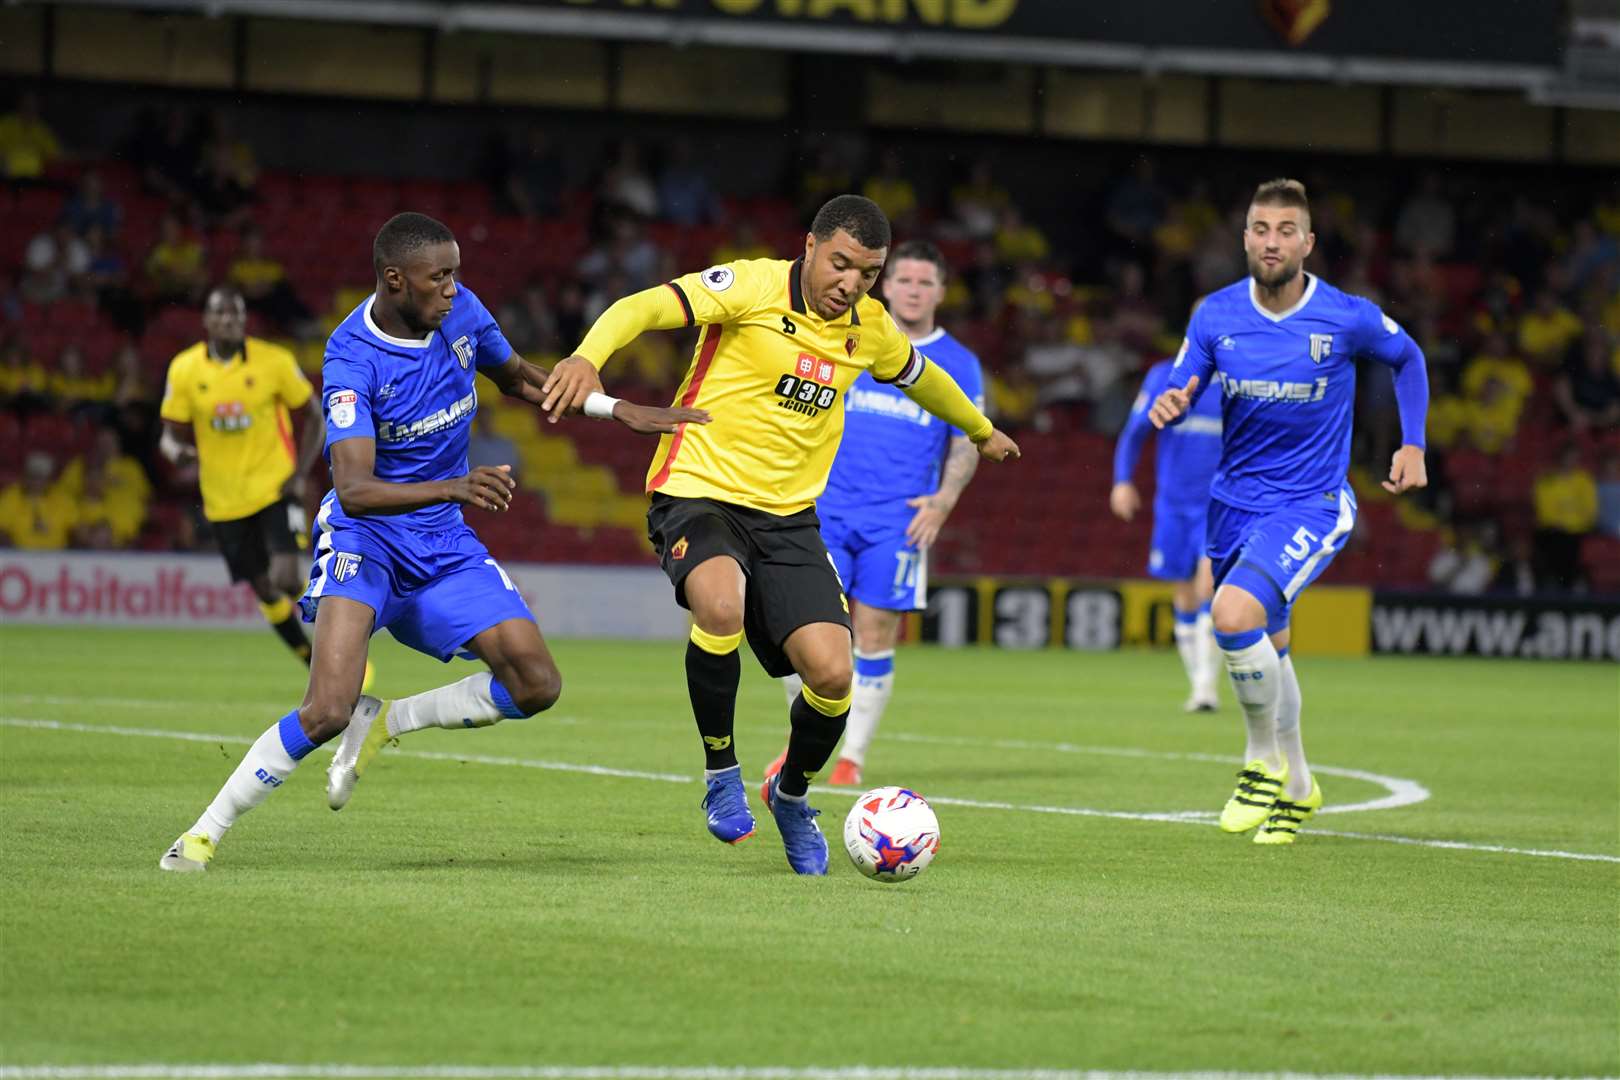 Tom Bedford is working with Watford FC, pictured here playing a cup tie against Gillingham in 2016. Picture: Barry Goodwin